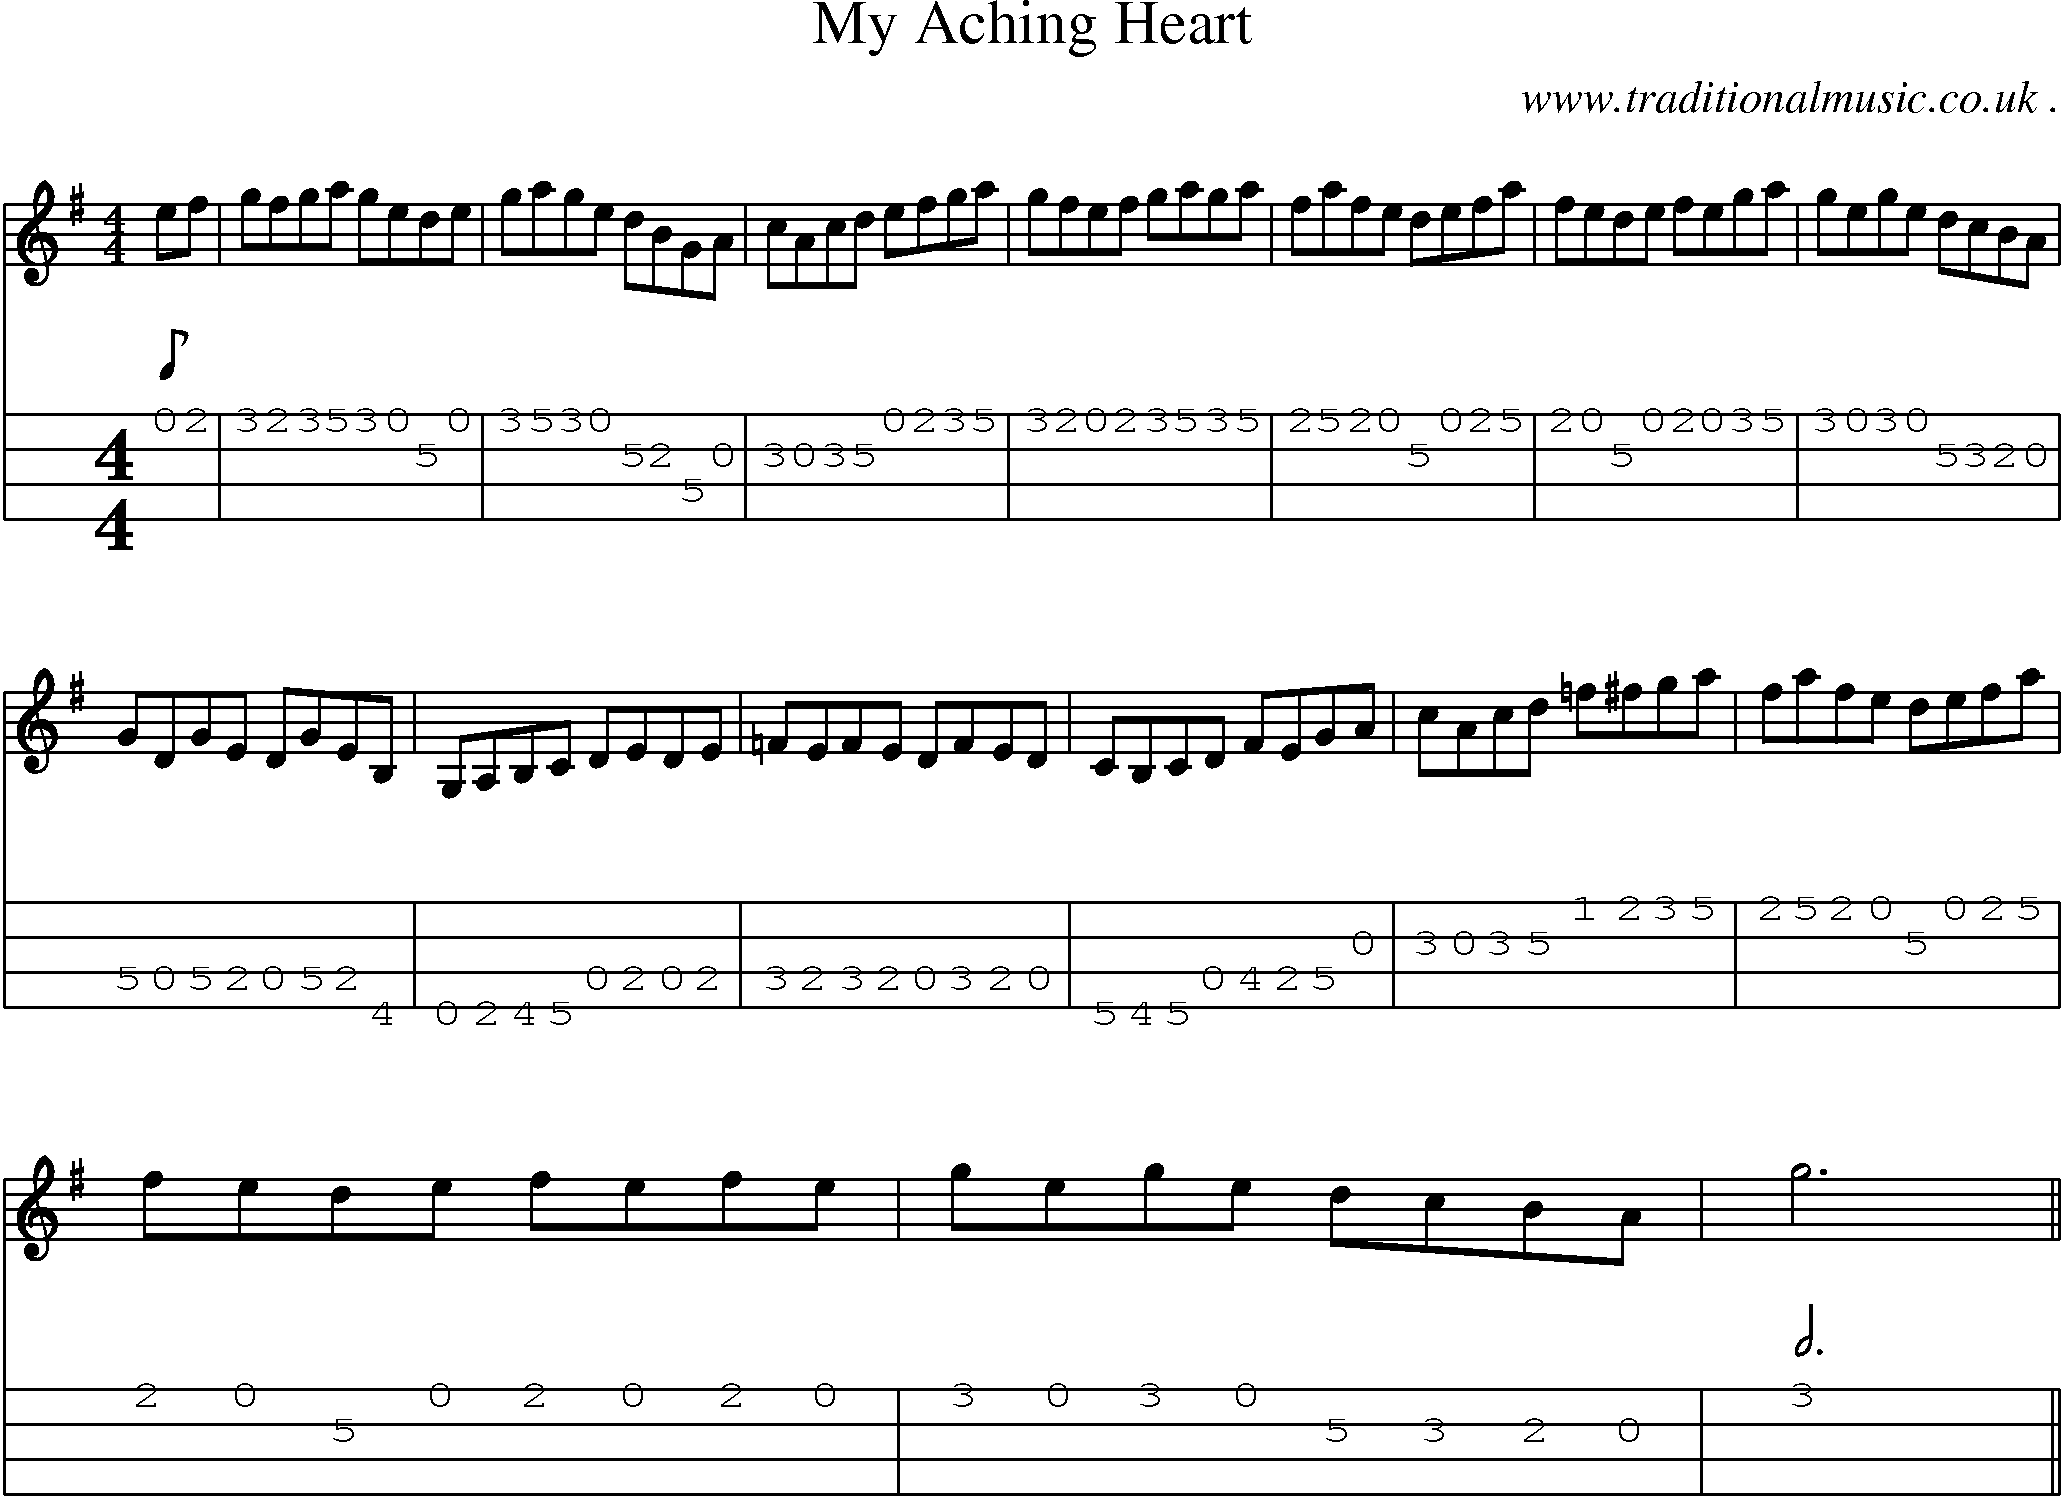 Music Score and Mandolin Tabs for My Aching Heart